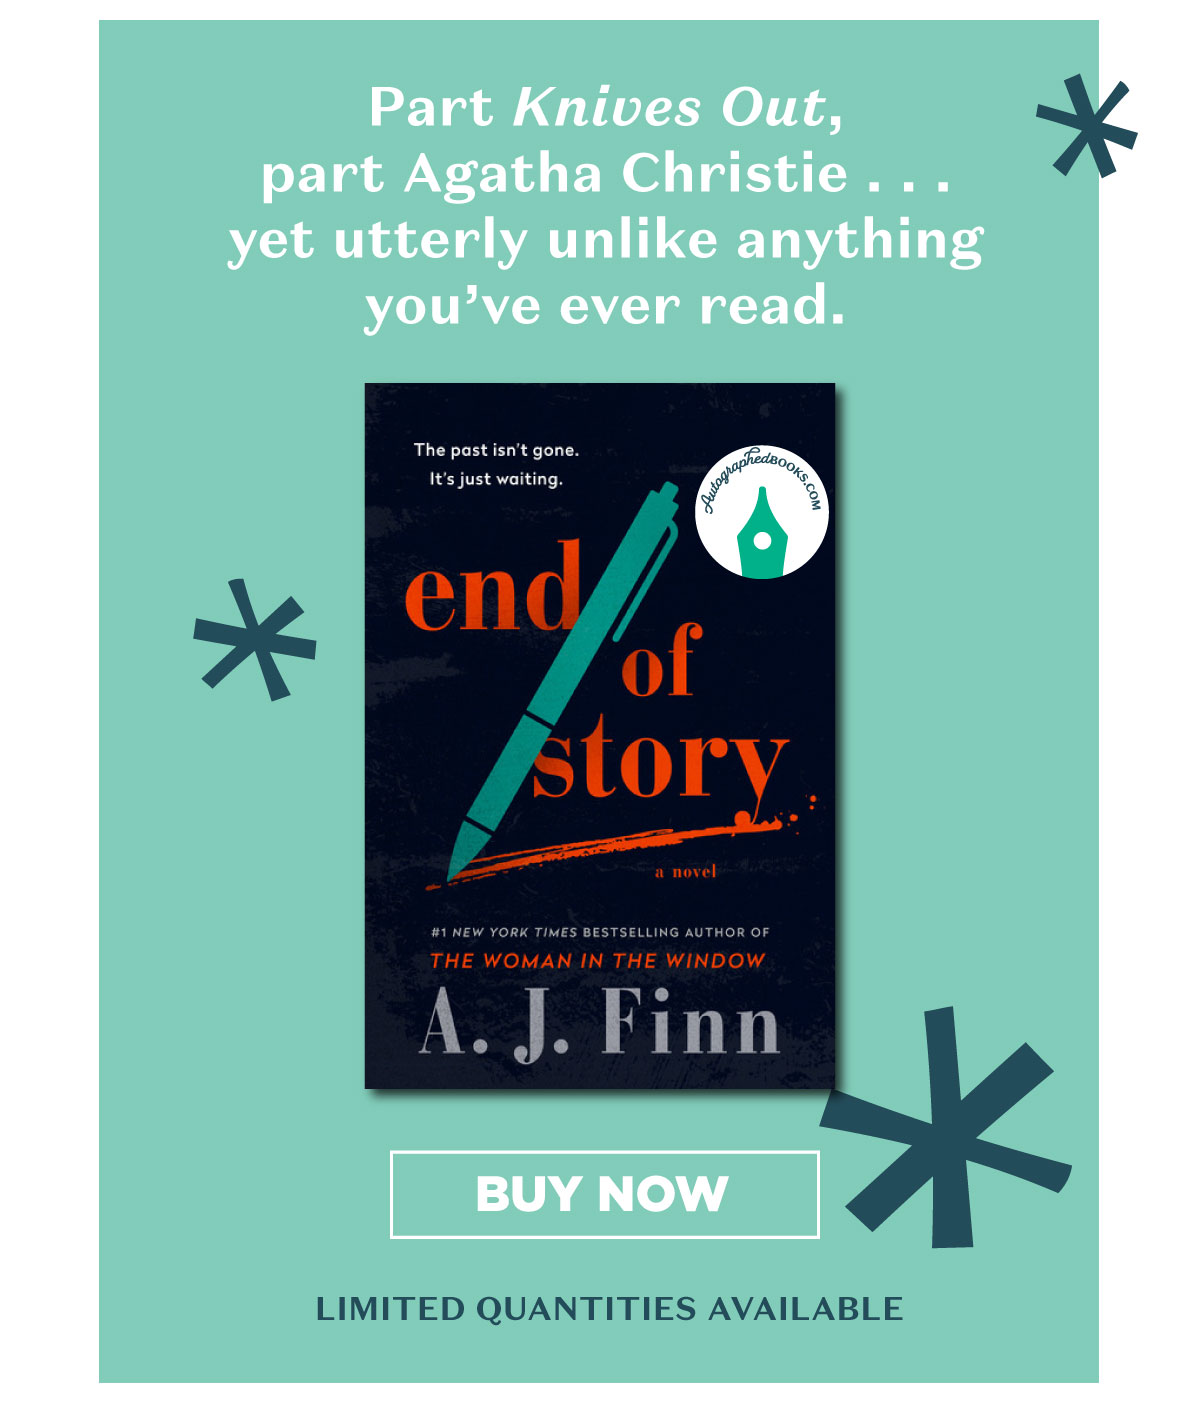 Part Knives Out, part Agatha Christie . .. yet utterly unlike anything you’ve ever read. A. J. Finn LIMITED QUANTITIES AVAILABLE 